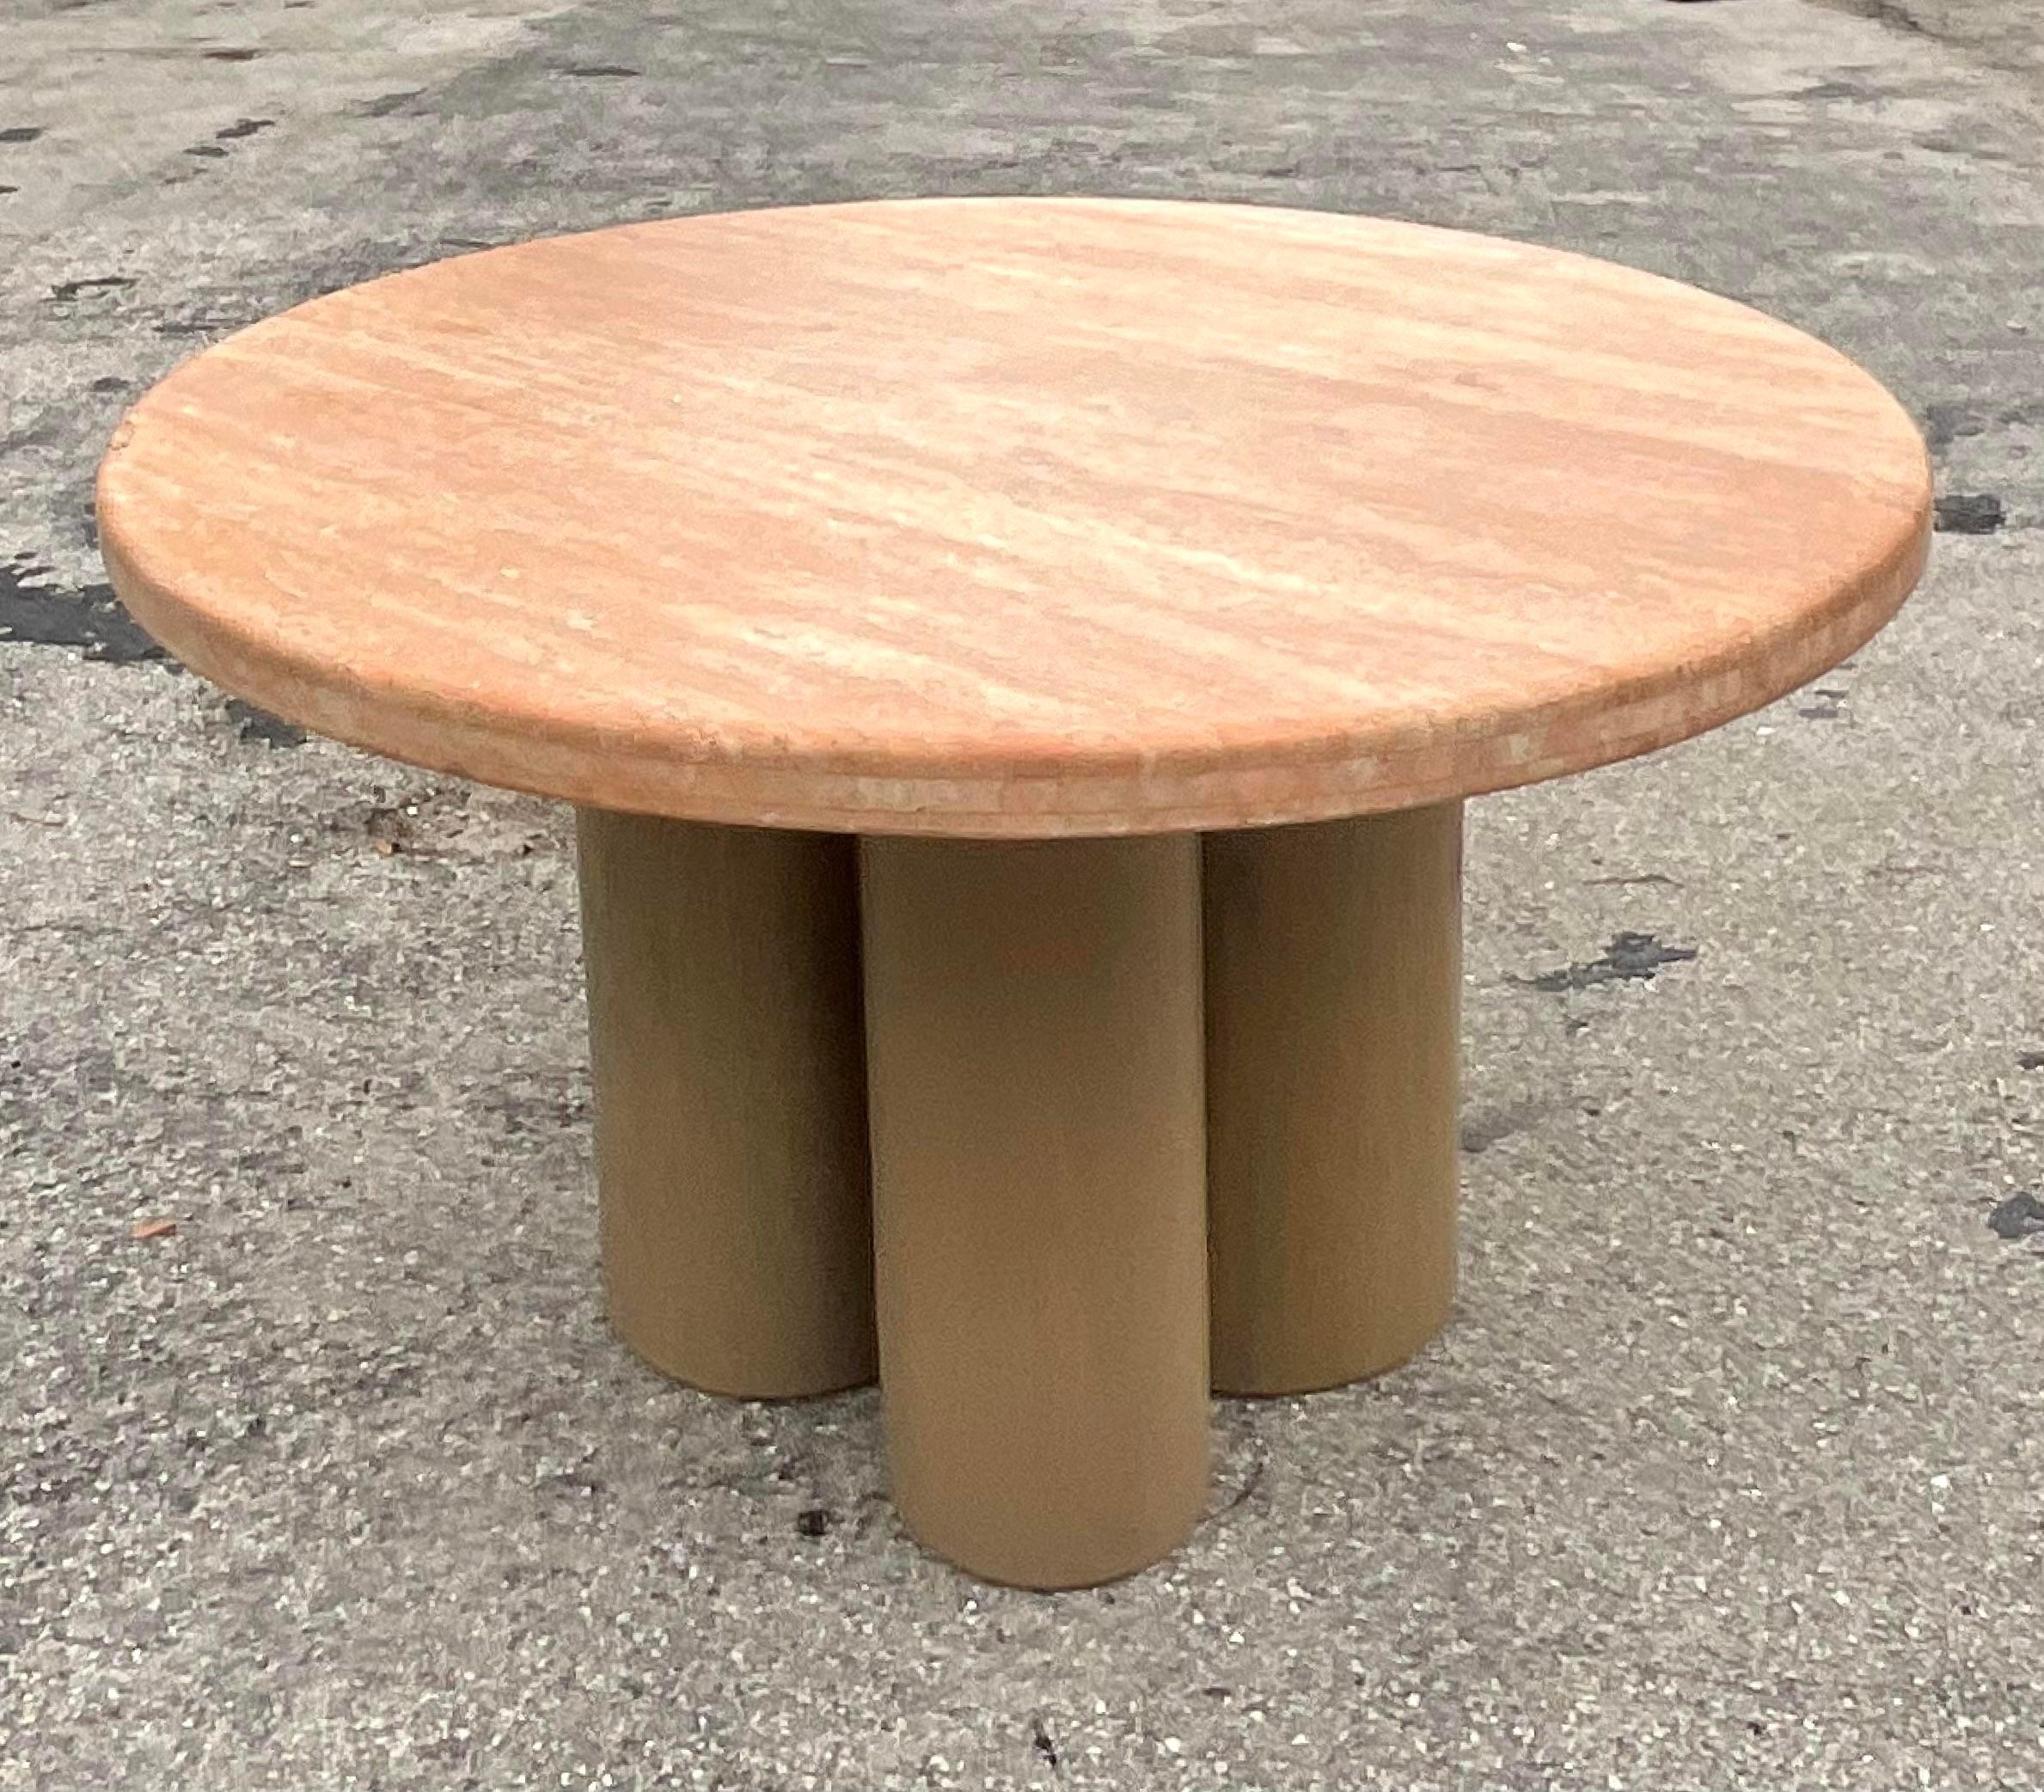 A fabulous vintage contemporary dining table. A chic custom built round table with a tessellated stone top. A bundled cylinder base in a cerused oak. Acquired from a Palm Beach estate. 